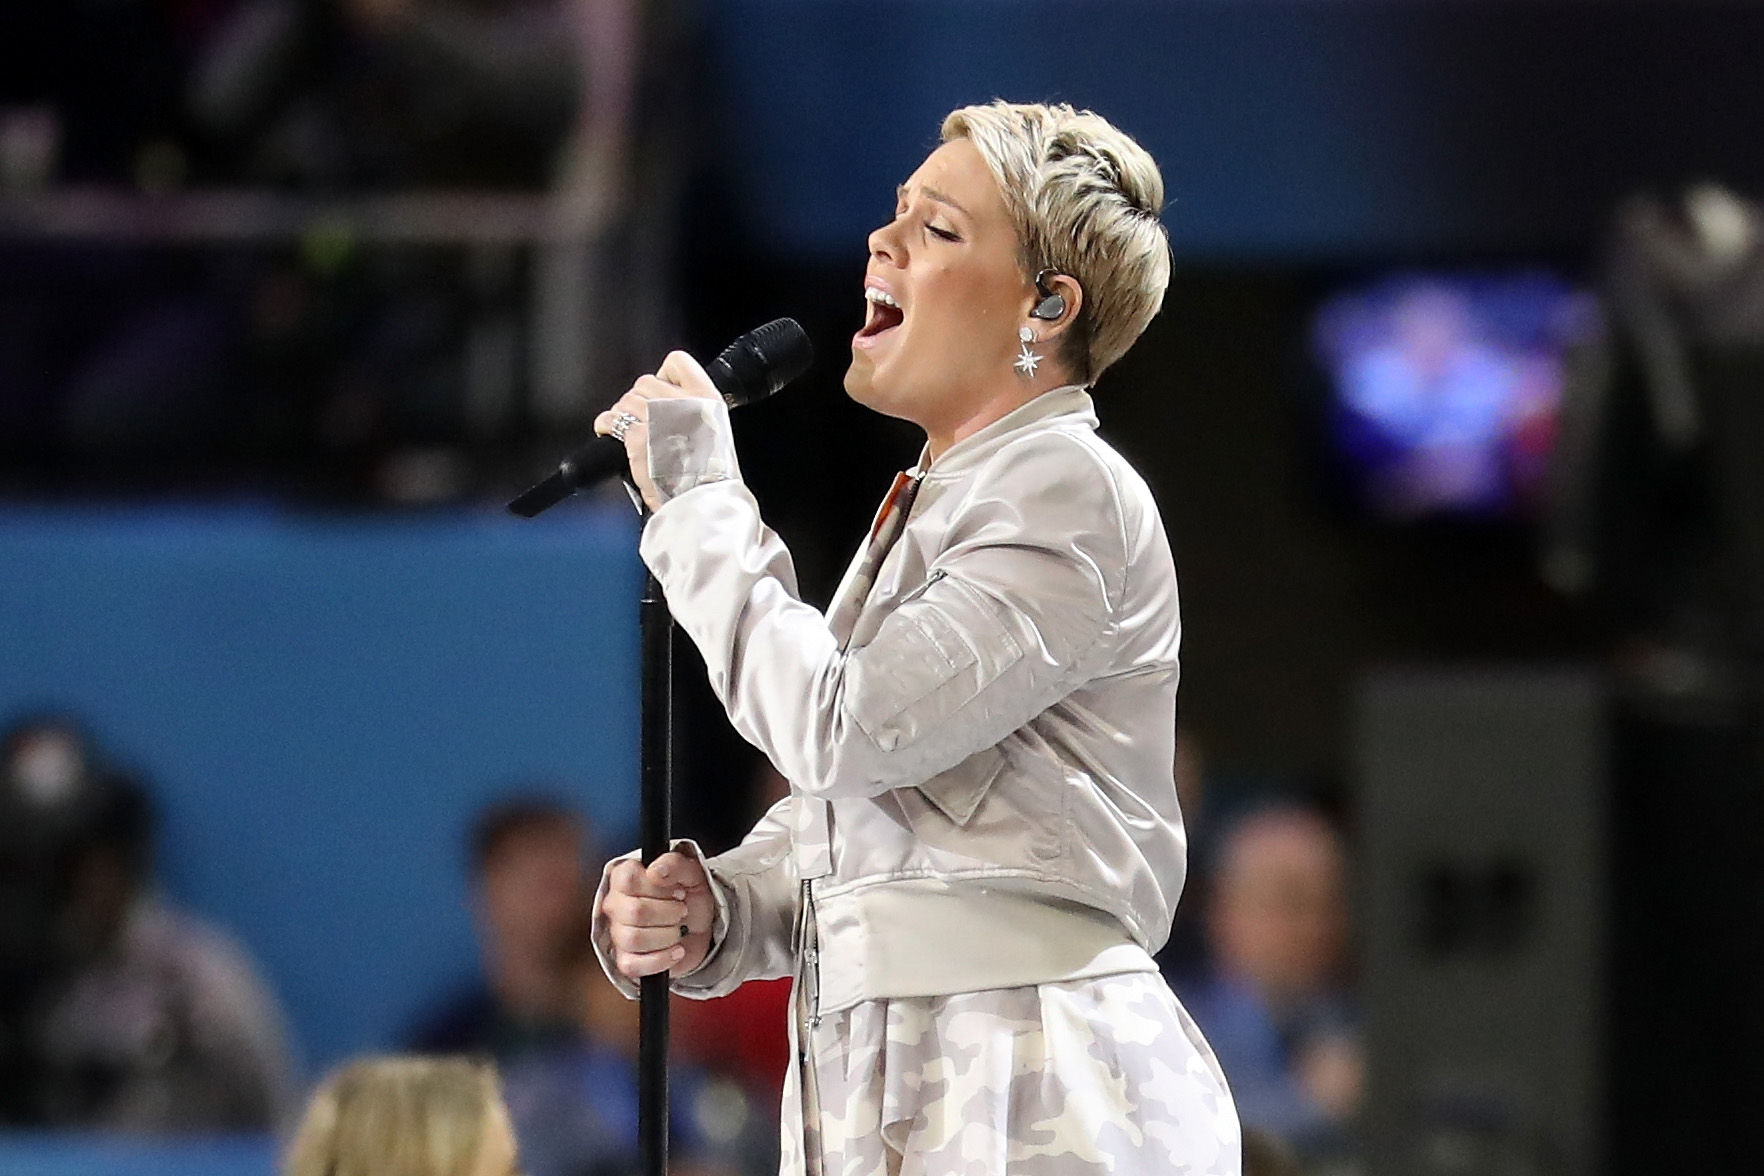 MINNEAPOLIS, MN - FEBRUARY 04:  Pink sings the national anthem prior to Super Bowl LII between the New England Patriots and the Philadelphia Eagles at U.S. Bank Stadium on February 4, 2018 in Minneapolis, Minnesota.  (Photo by Rob Carr/Getty Images)